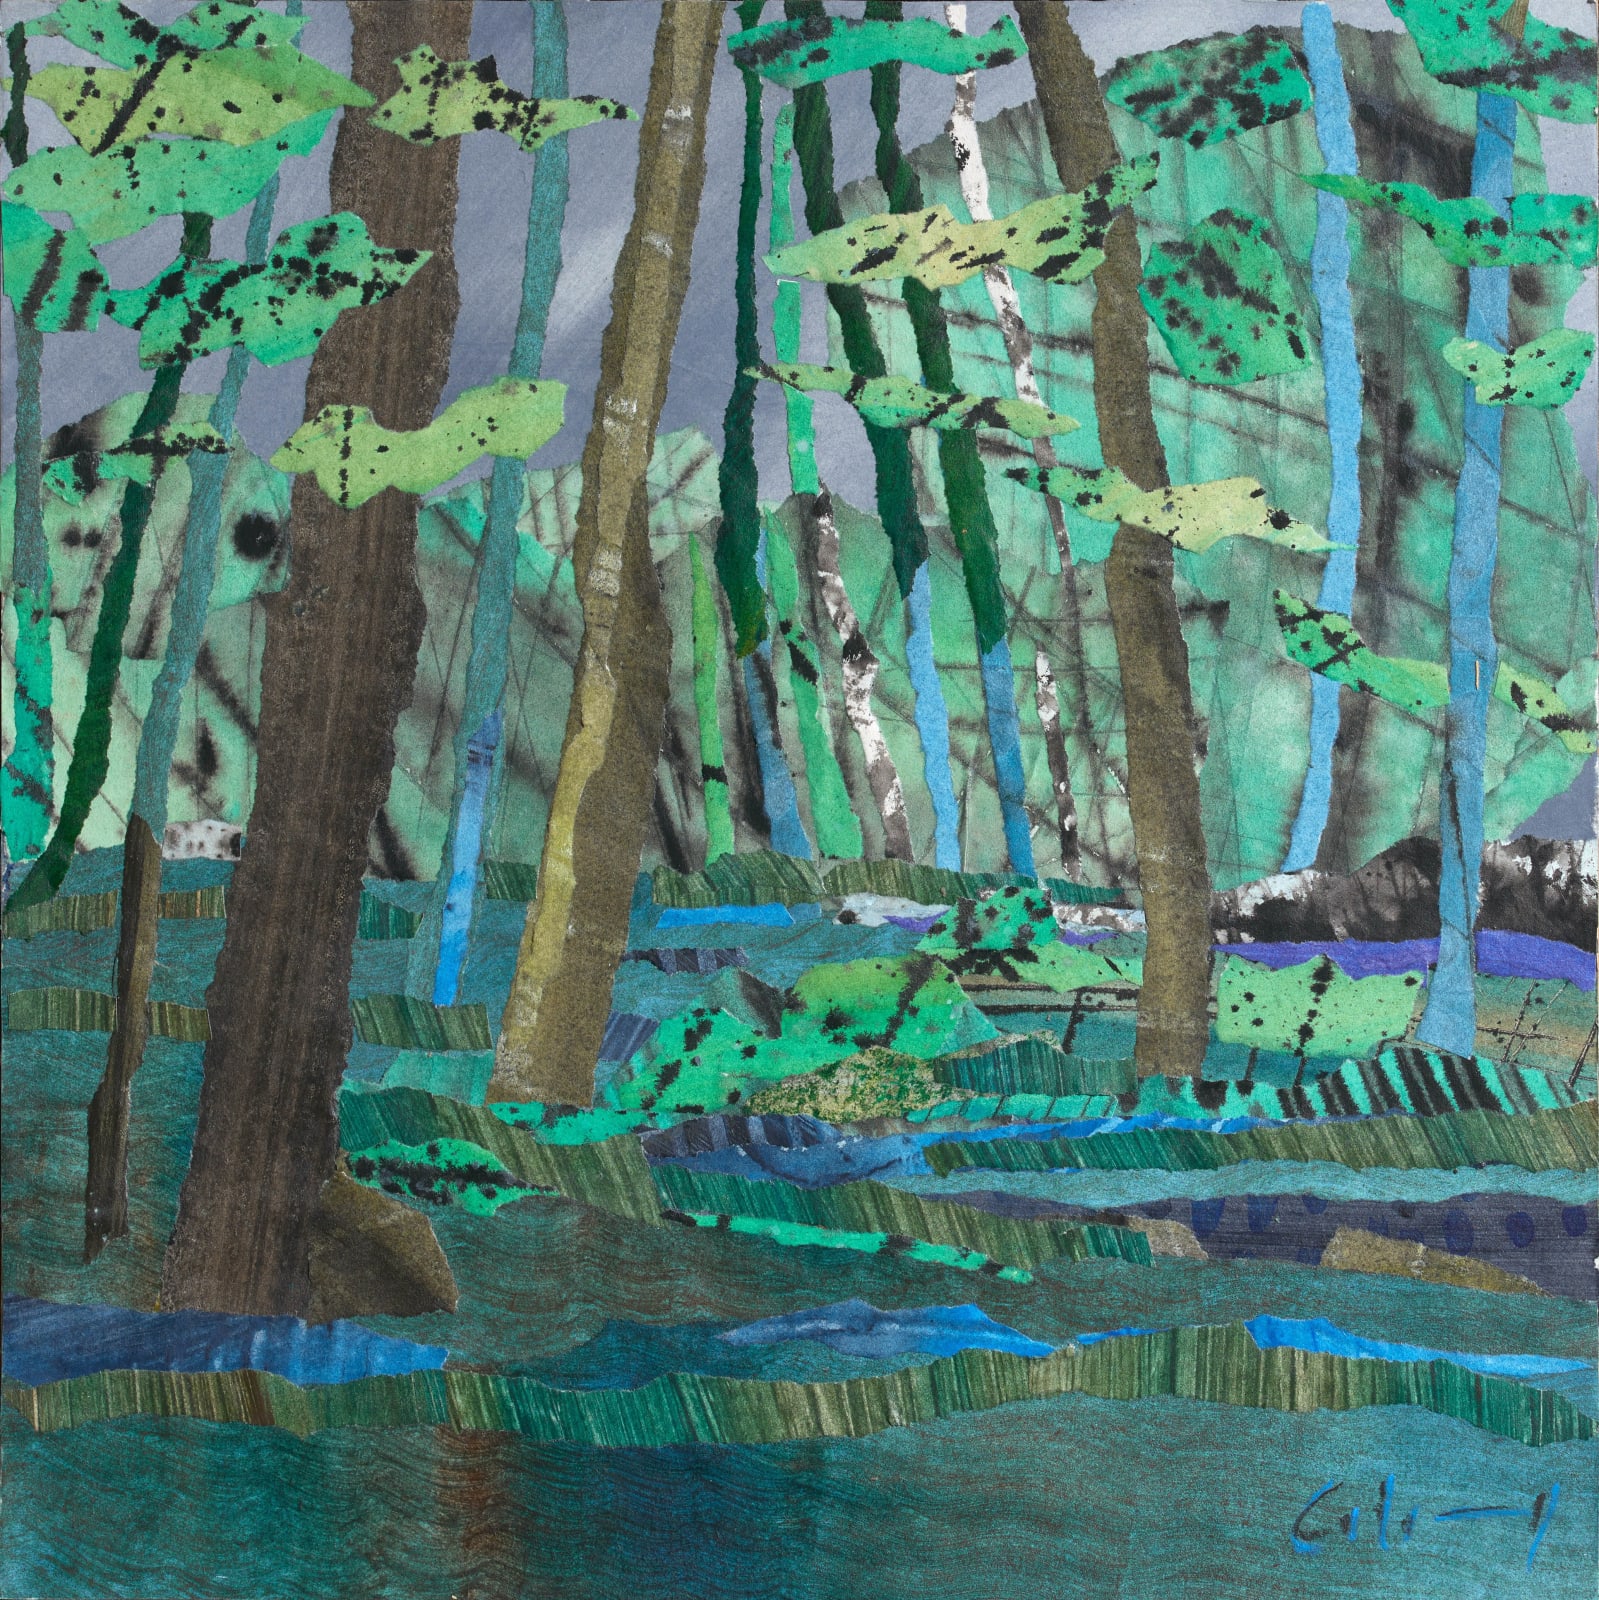 Marzia Colonna, Woods in May, 2022